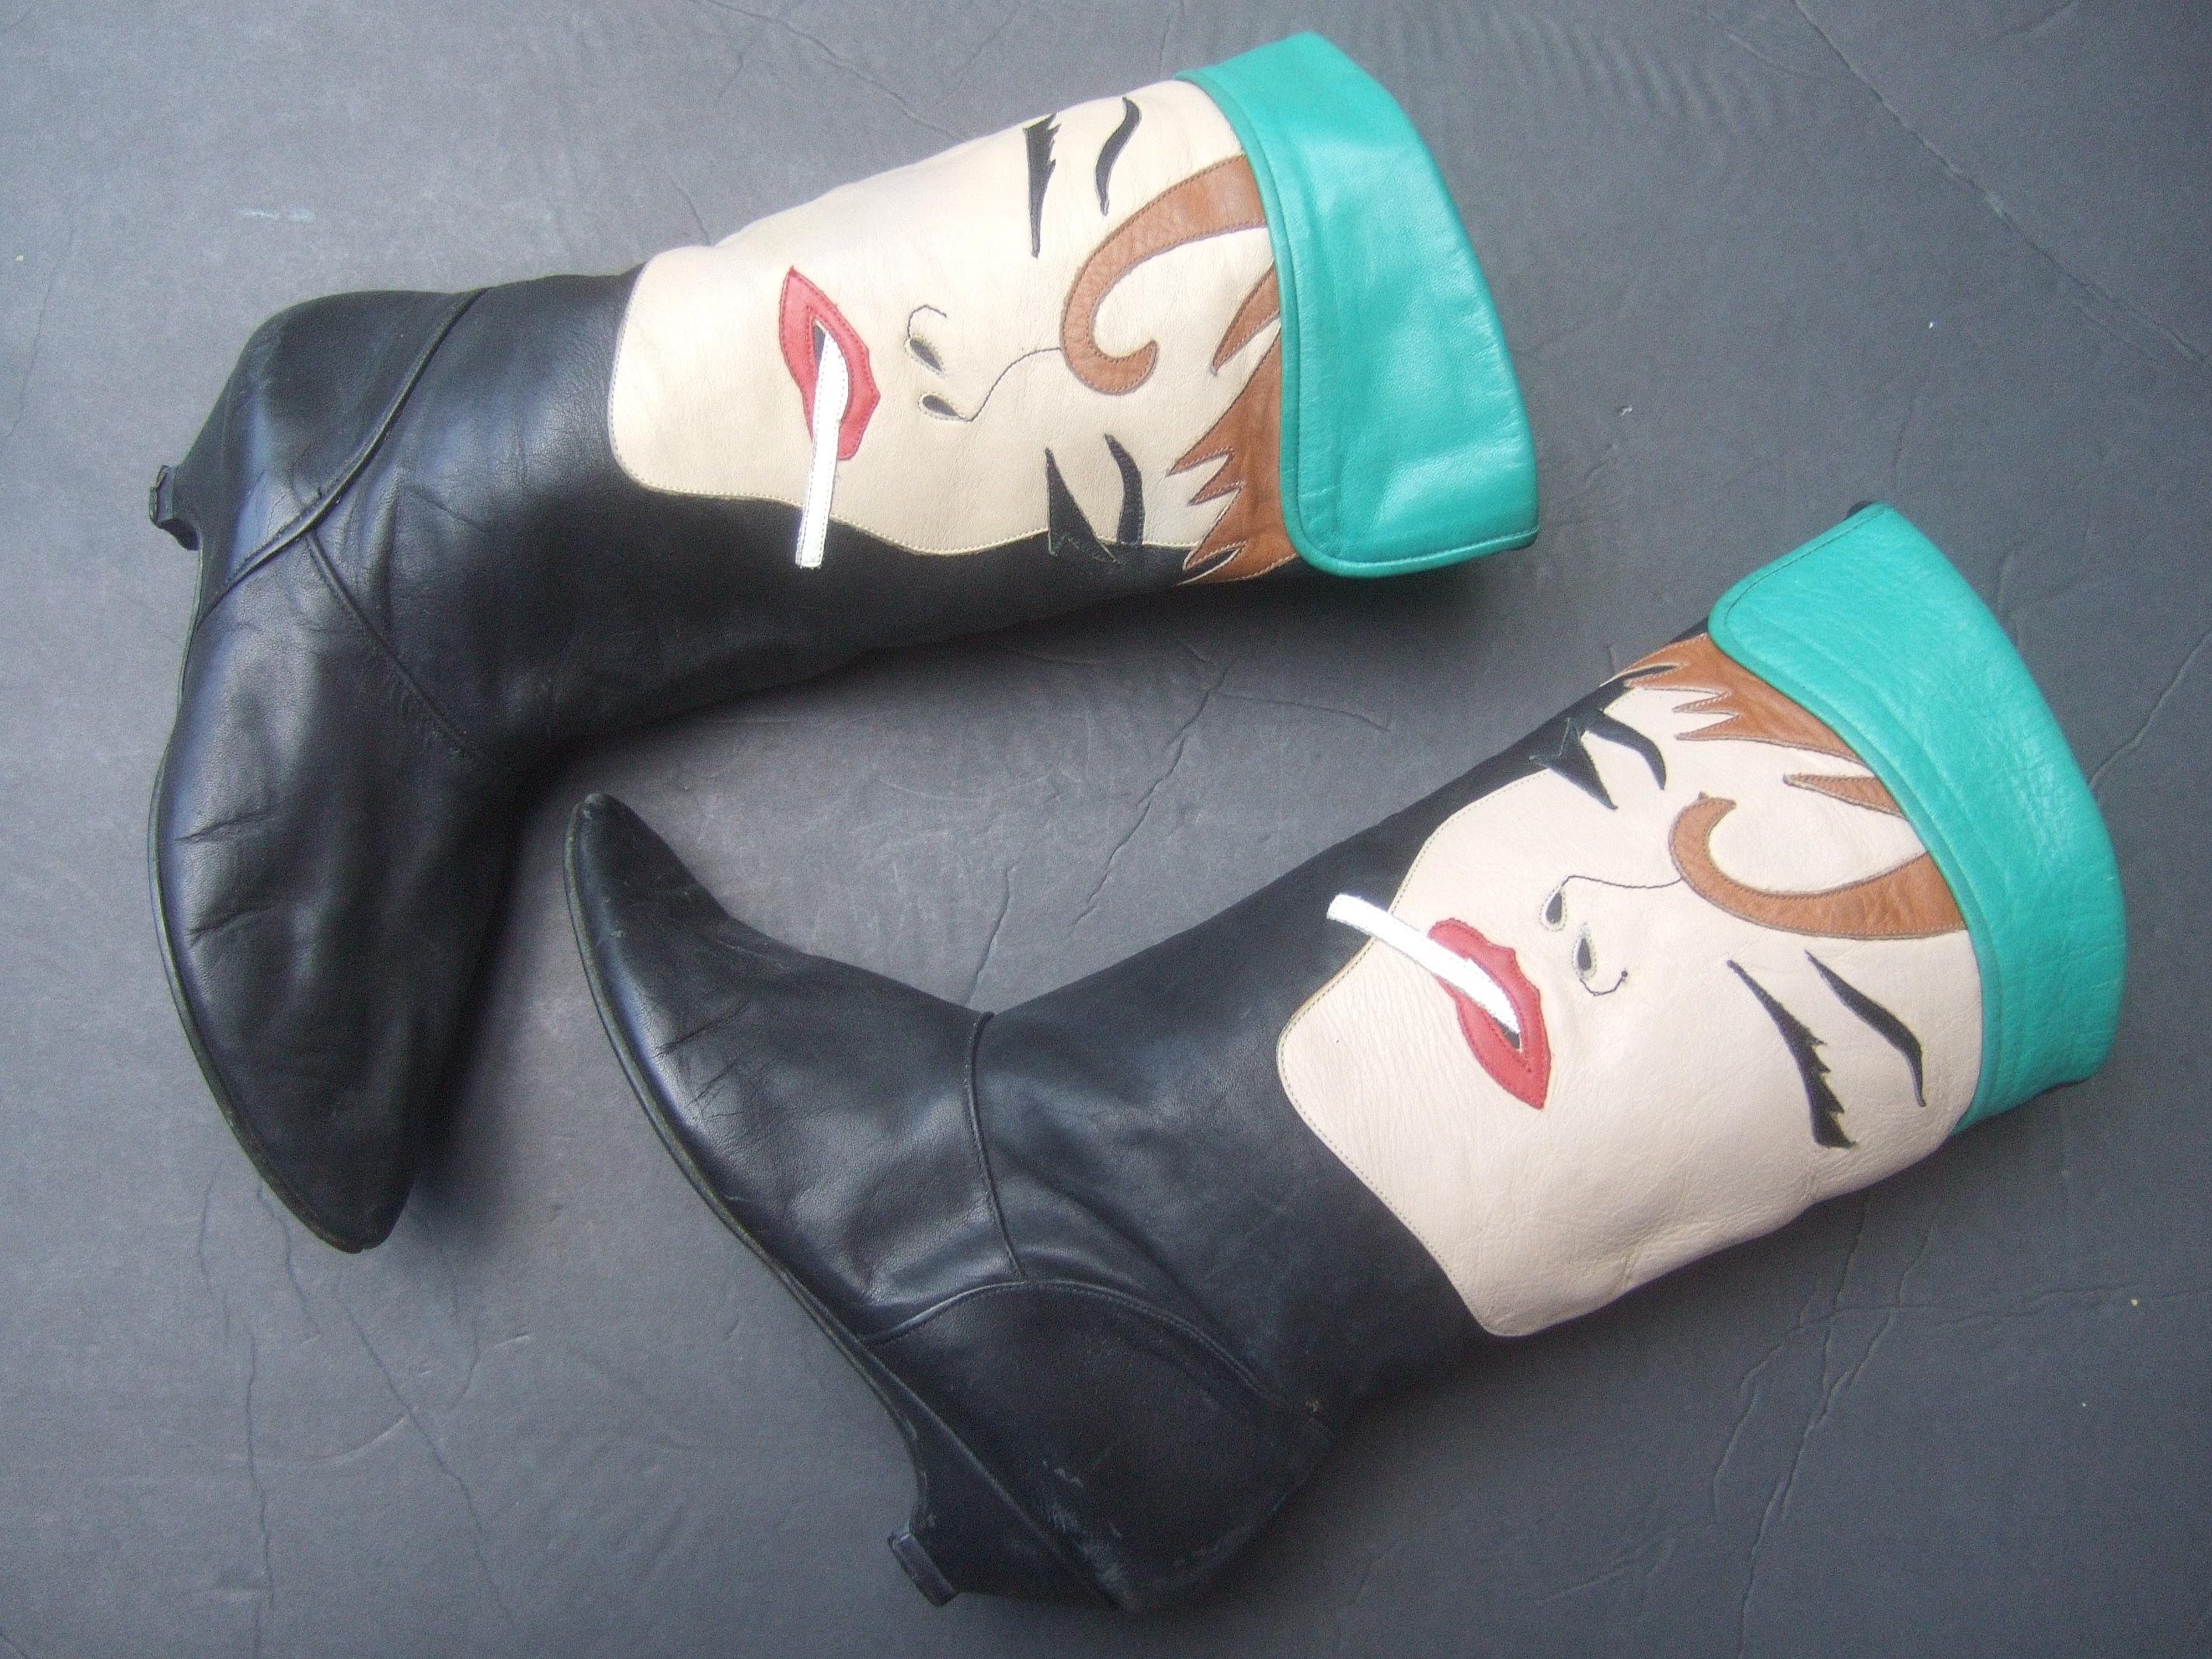 Edgy mod pop art leather boots designed by Zalo c 1980s
The unique avant-garde leather boots are constructed with flesh tone
leather panels depicting a woman's face on each exterior
side of each boot

The chic woman is smoking a cigarette protruding